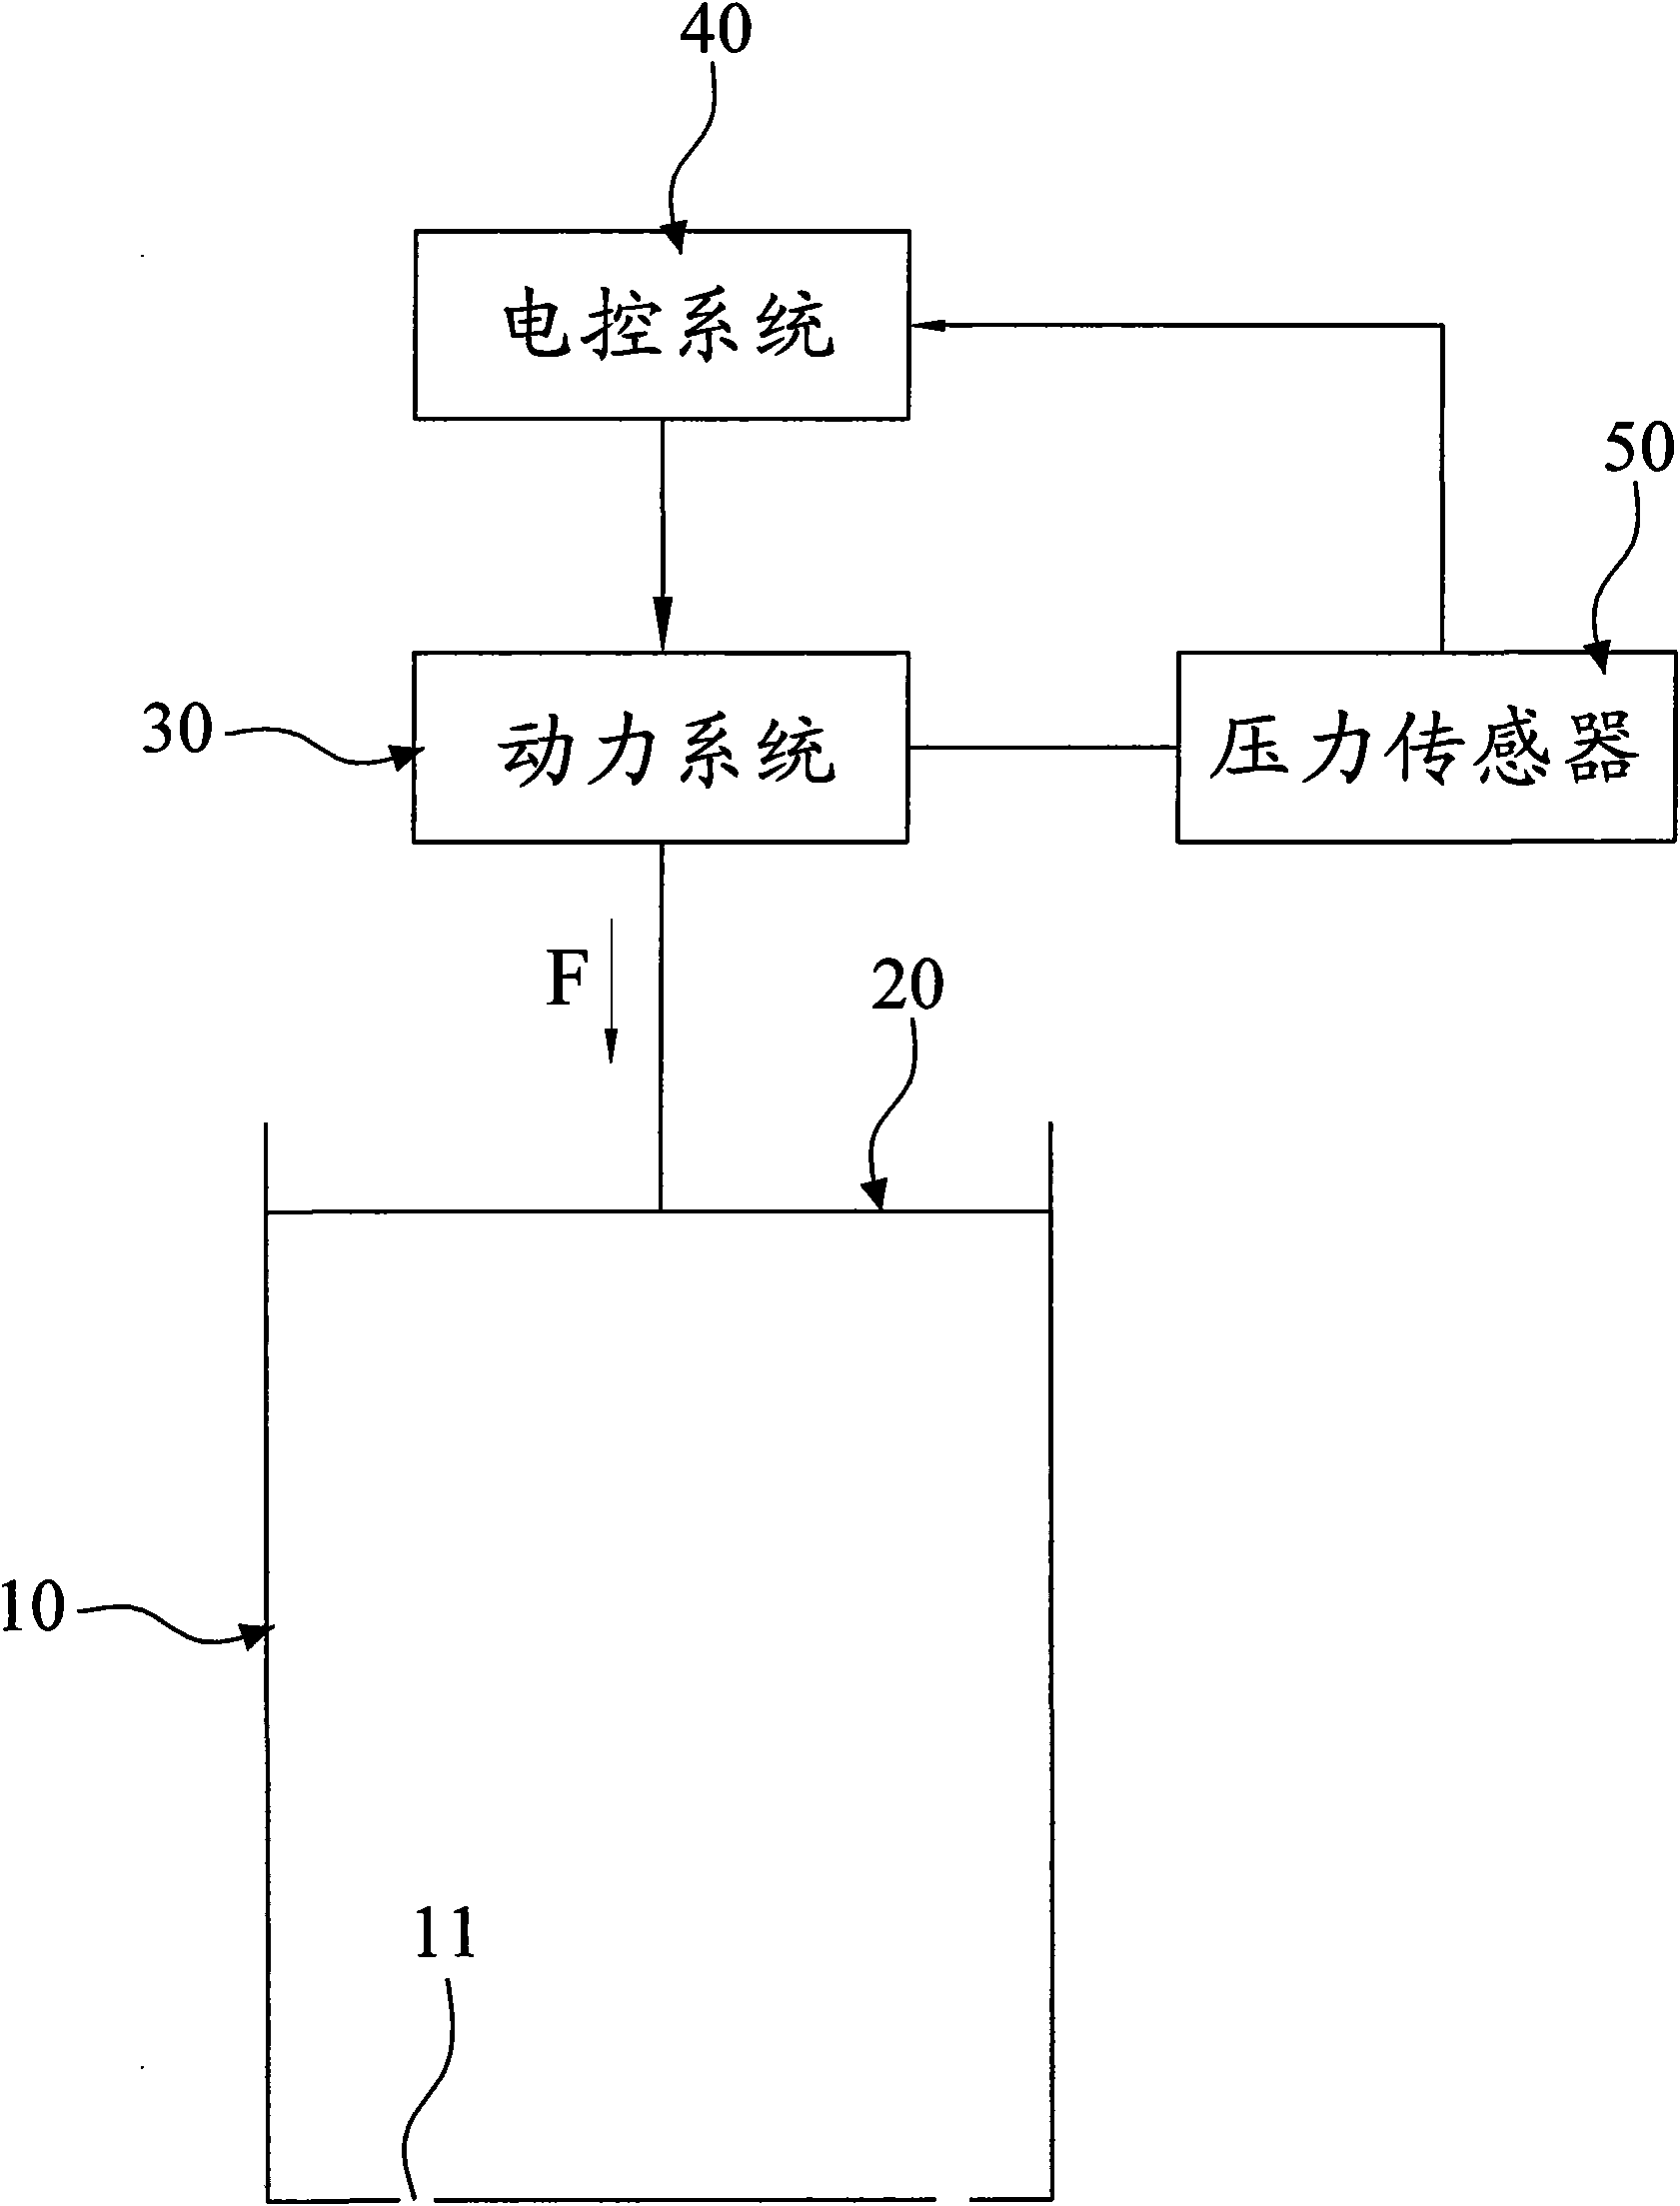 Extrusion-type textile flexibility dewatering method and device